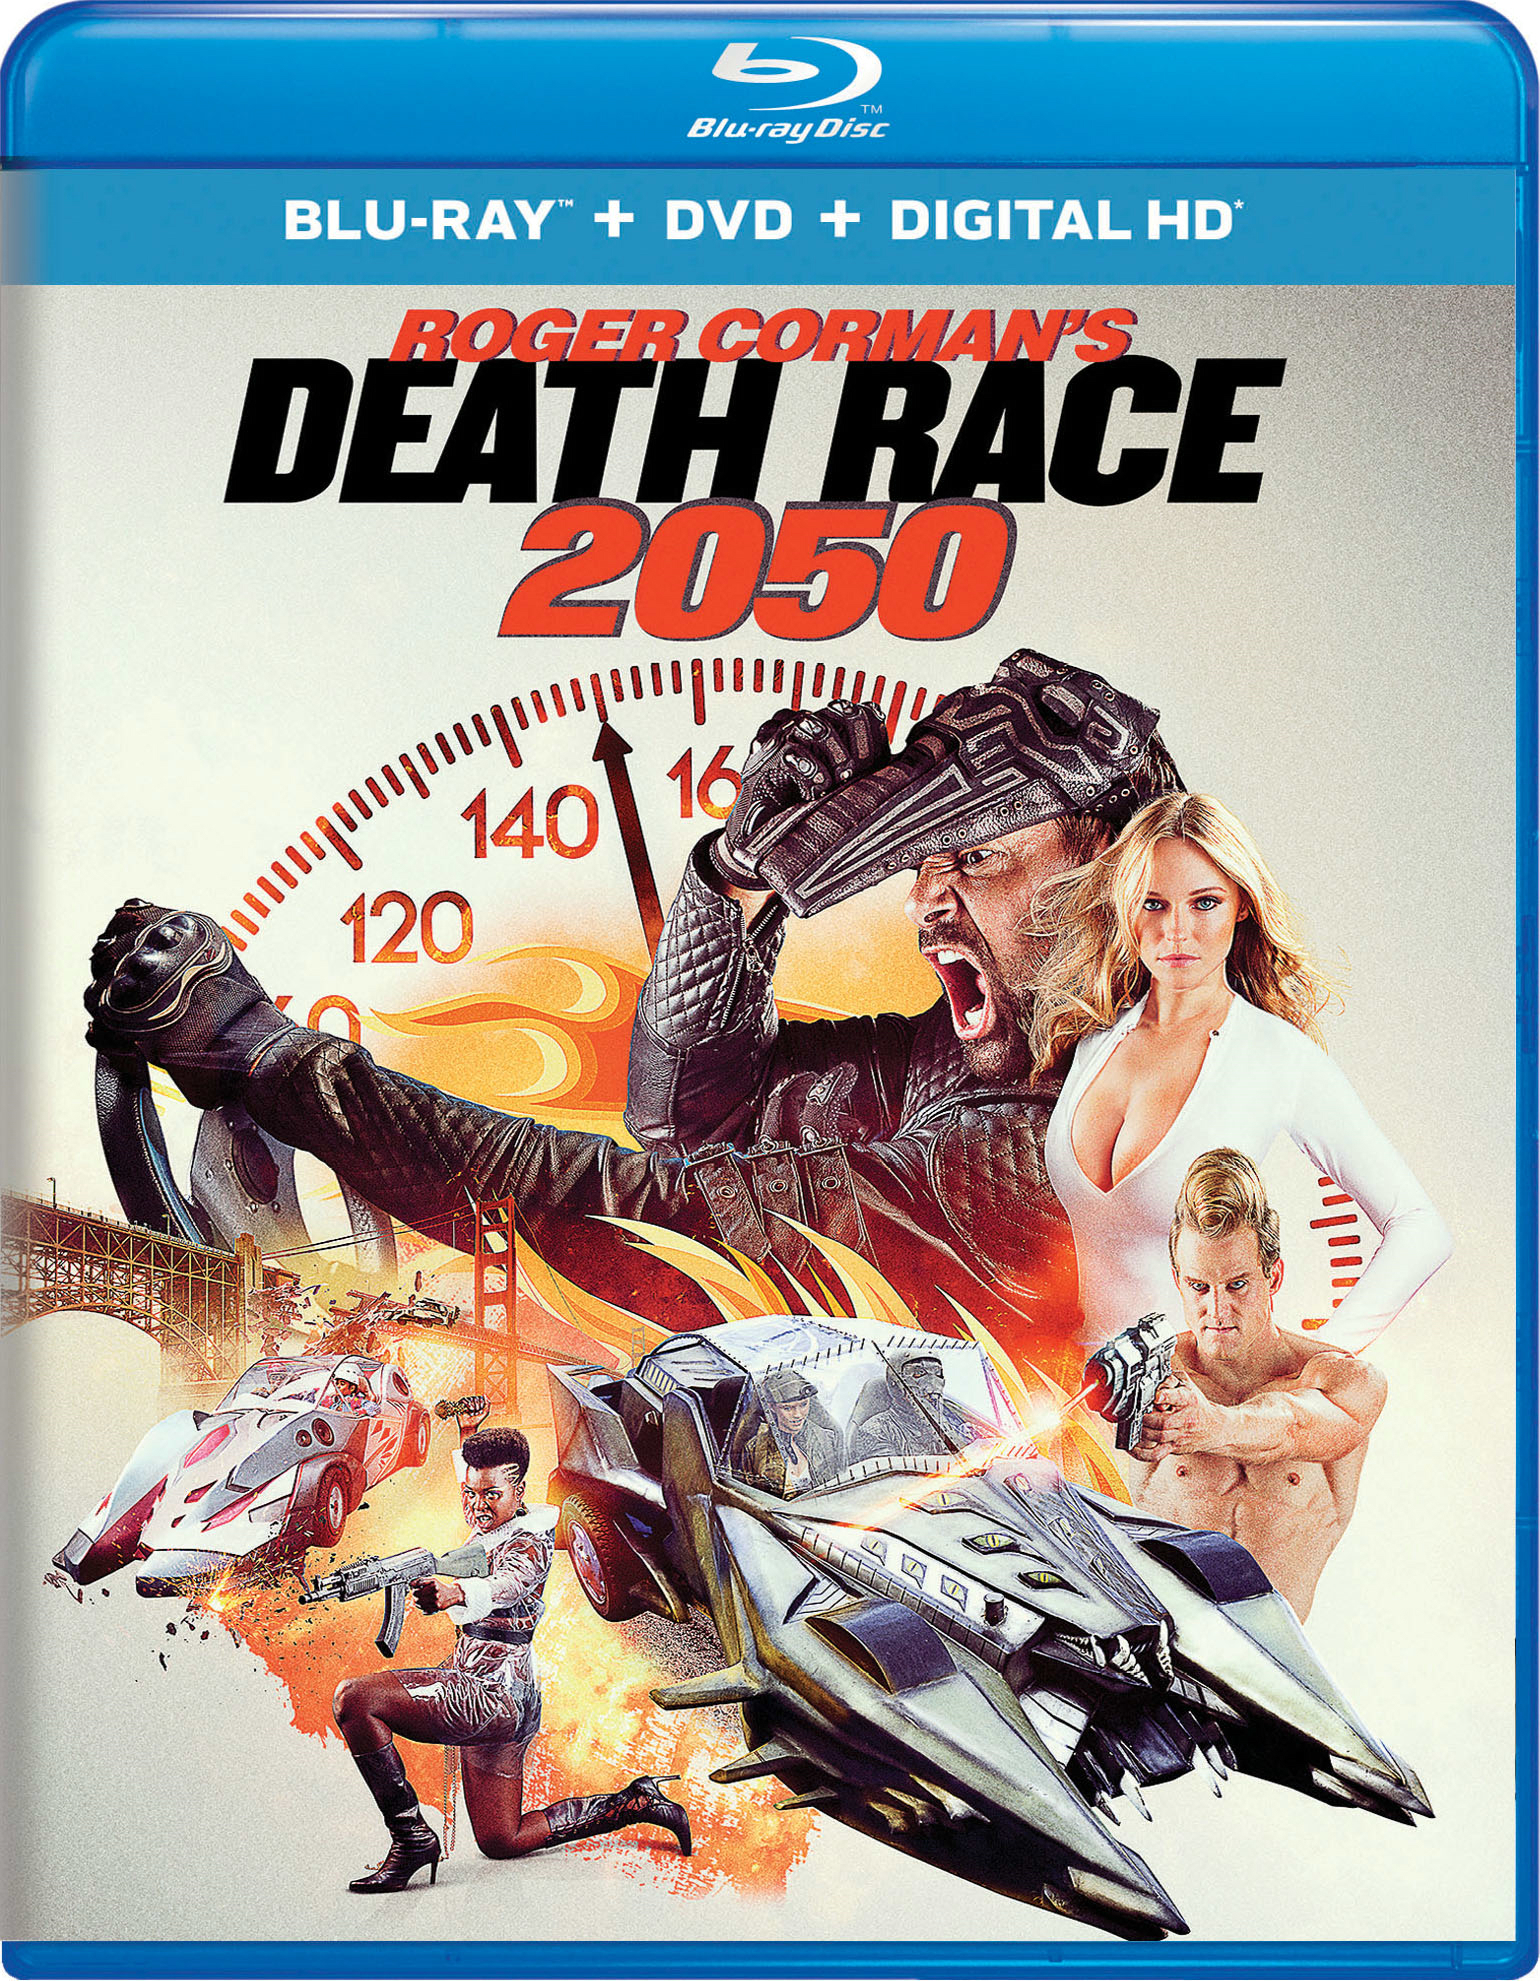 Roger Corman's Death Race 2050 (DVD + Digital) - Blu-ray [ 2016 ]  - Action Movies On Blu-ray - Movies On GRUV